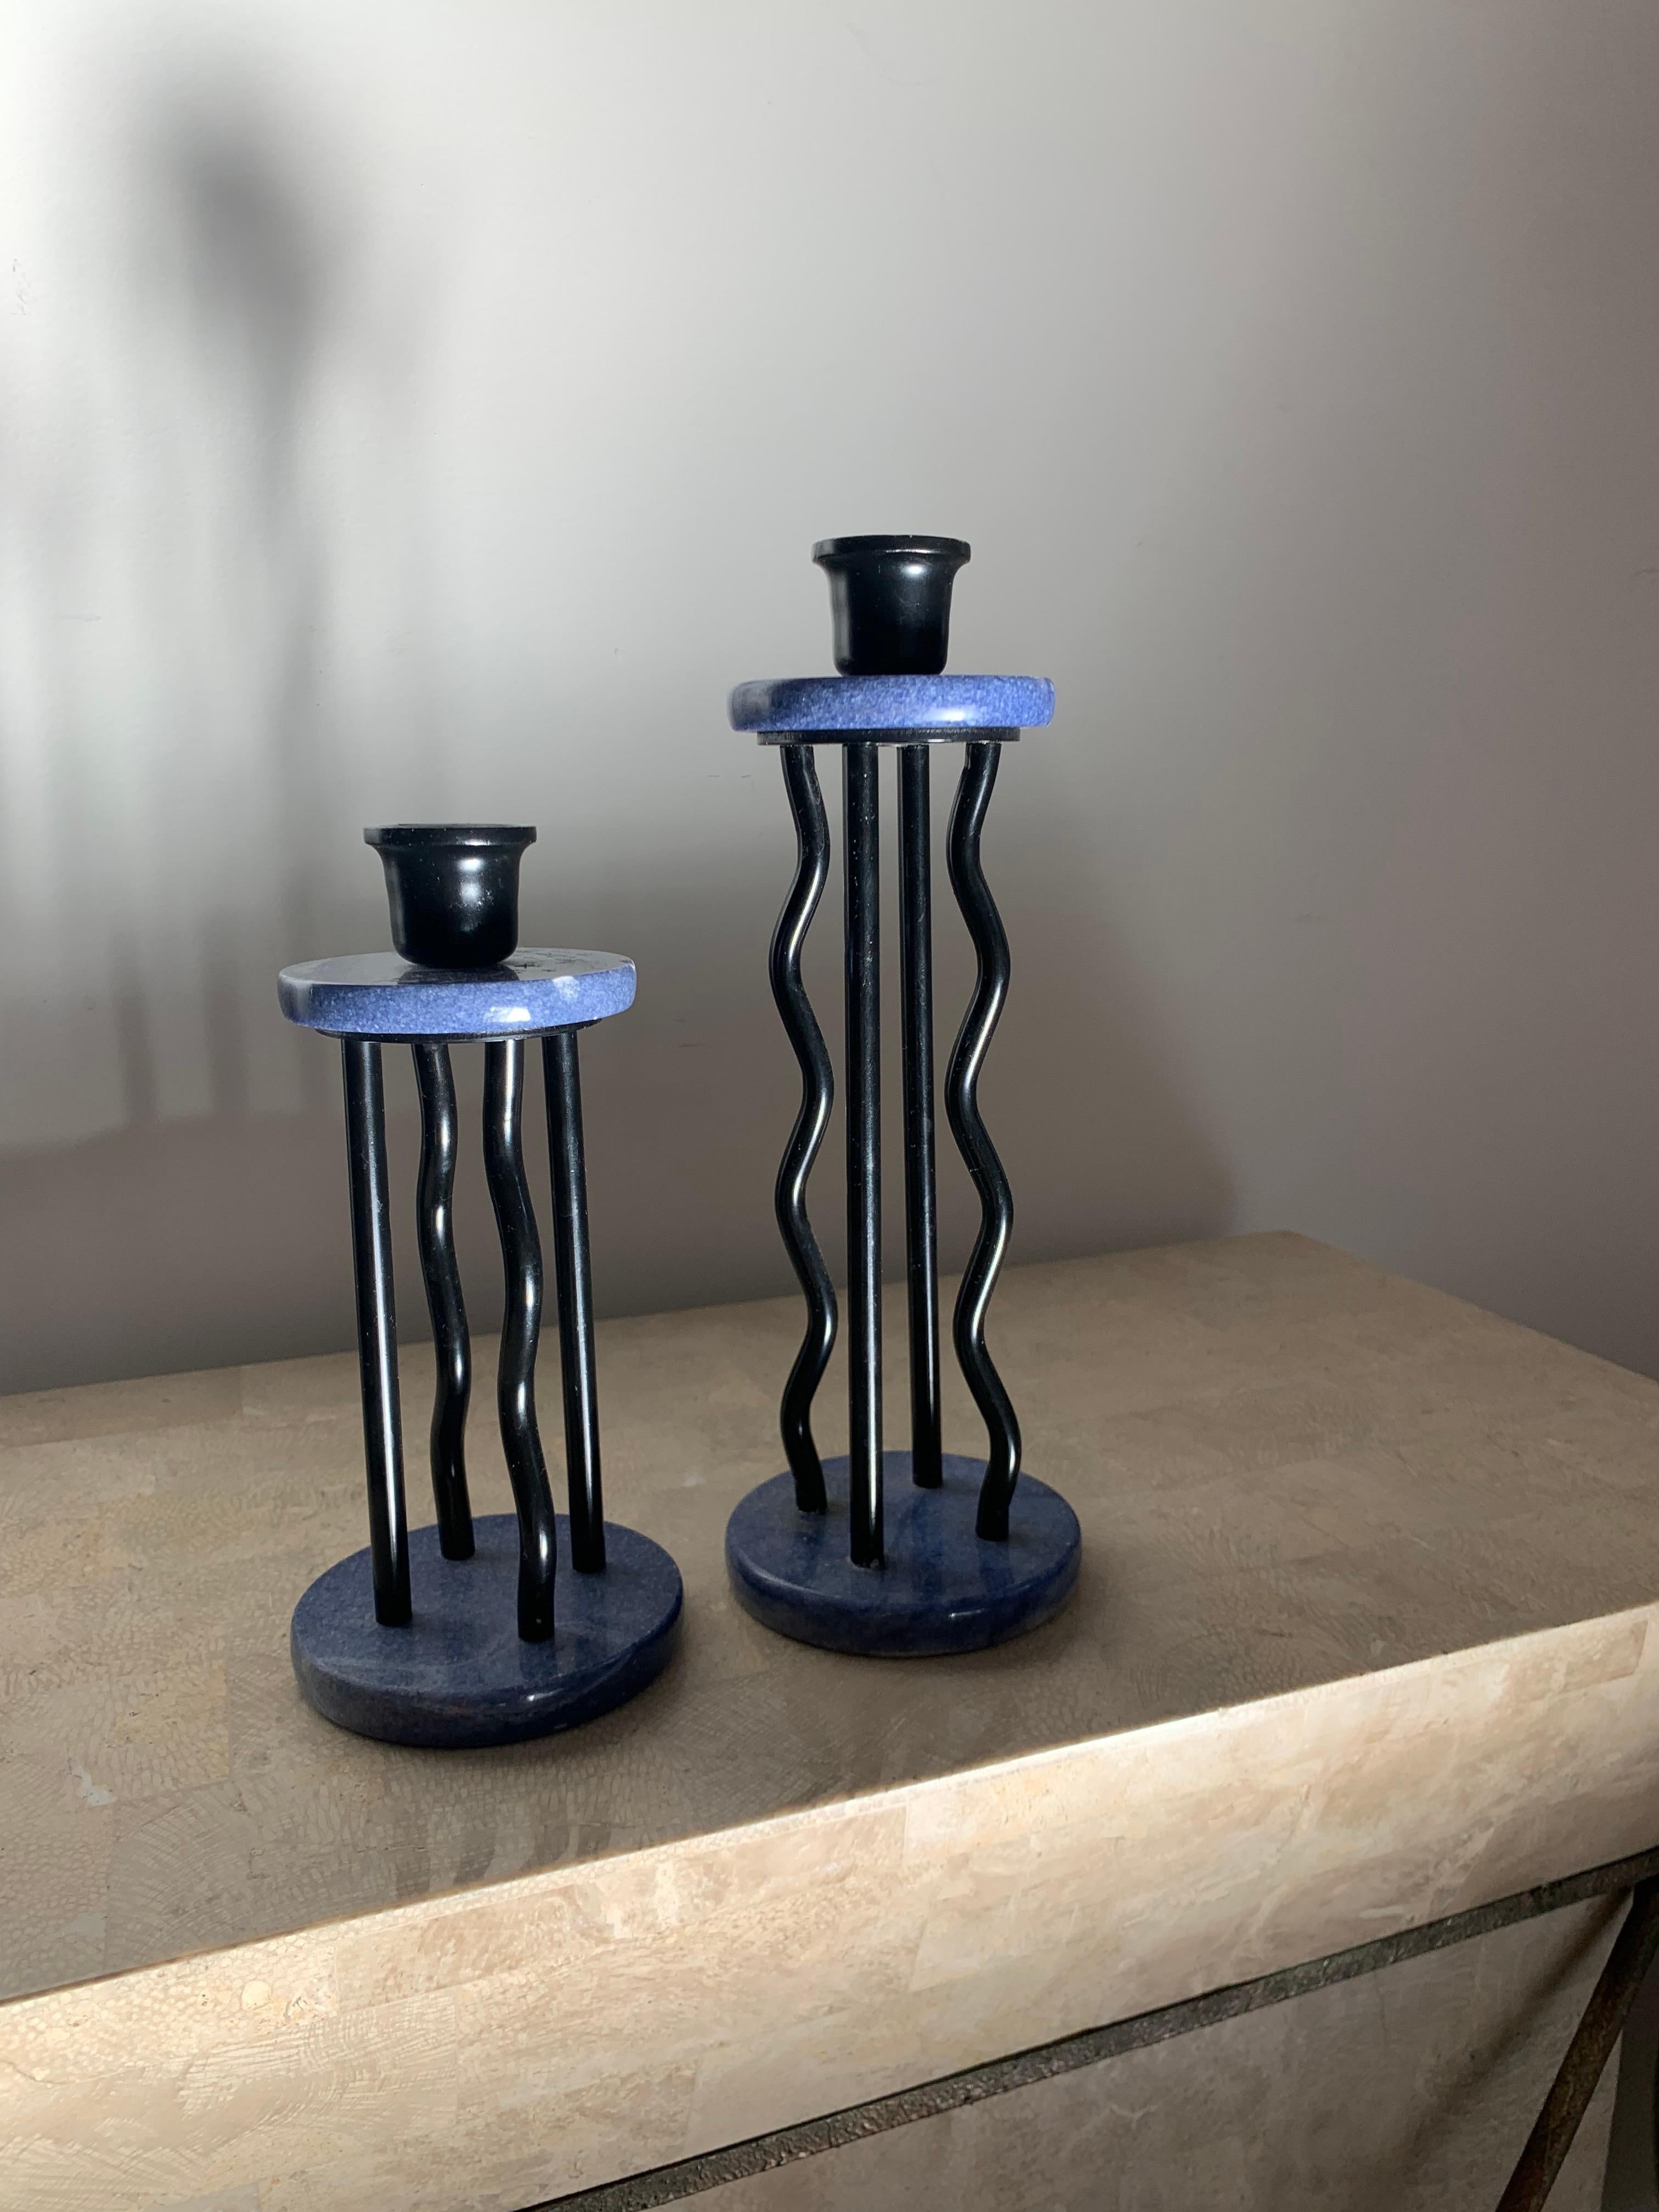 Rare pair of vintage Memphis Milano candlesticks in black lacquer and denim toned marble. Some signs of age but - relics of history.

Measures: Taller 10” tall, short 8” tall.